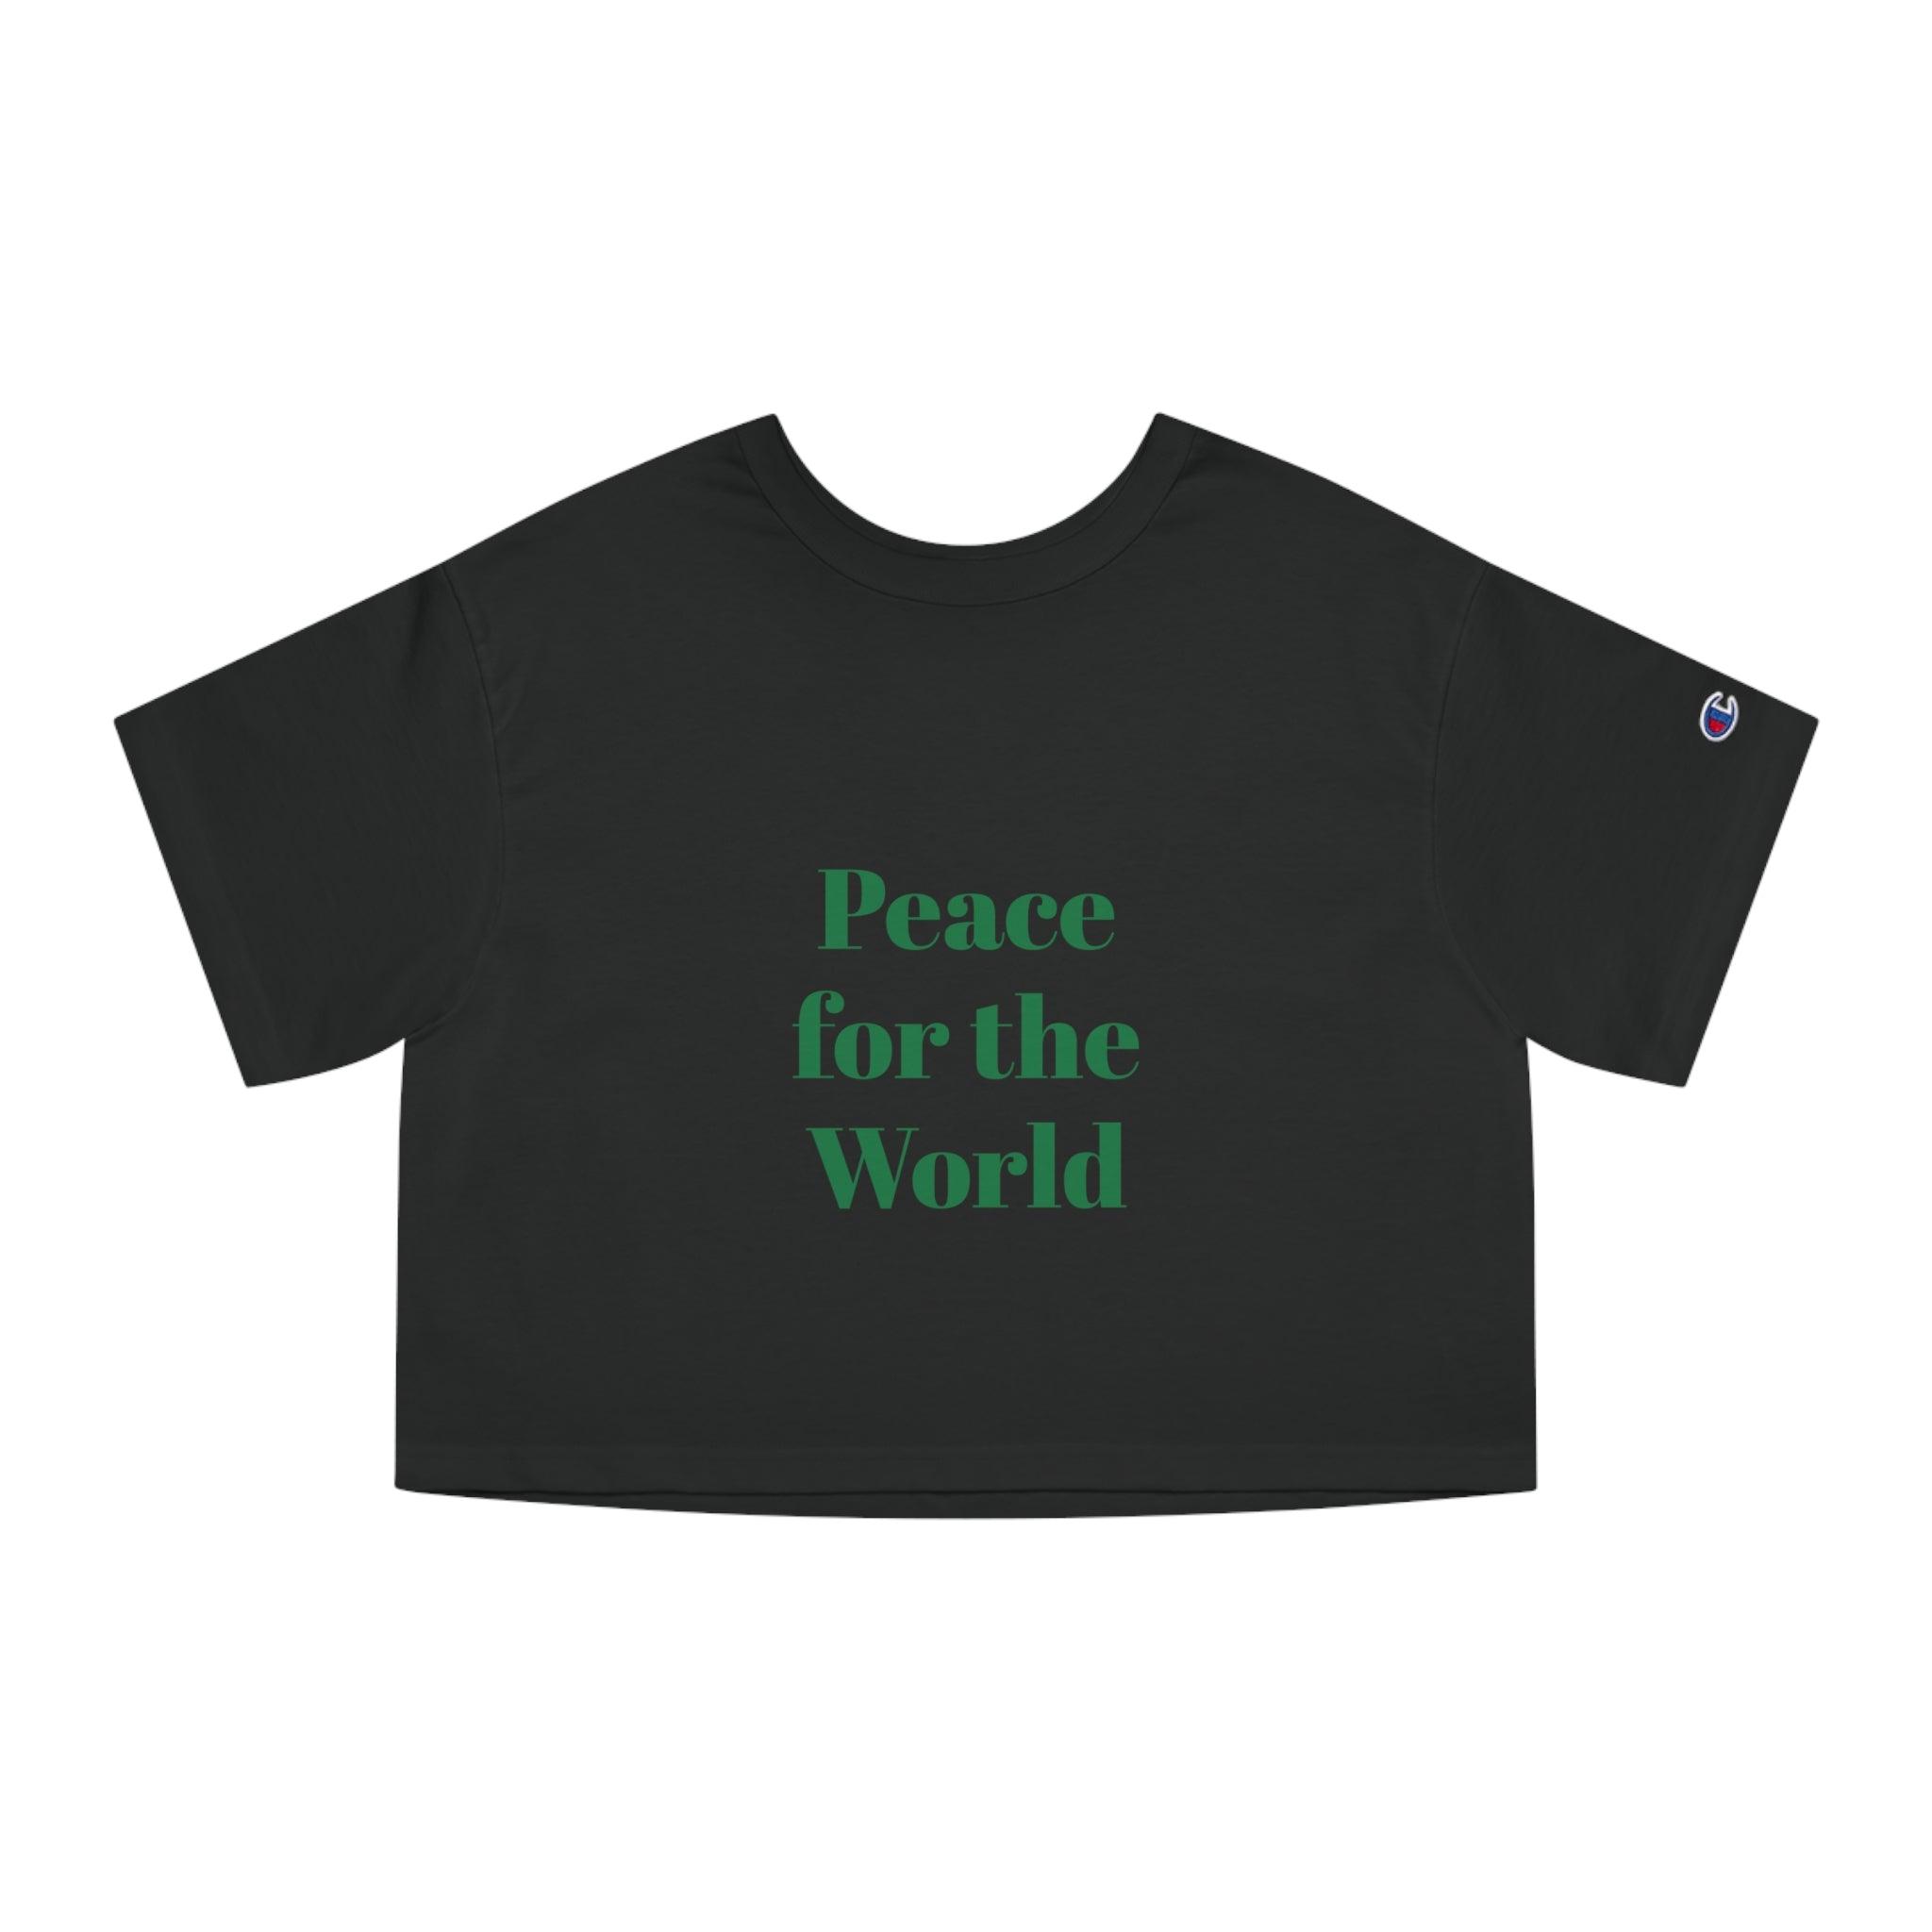 Copy of Peace for the World Copy of Champion Women's Heritage Cropped T-Shirt - MyStoreLiving